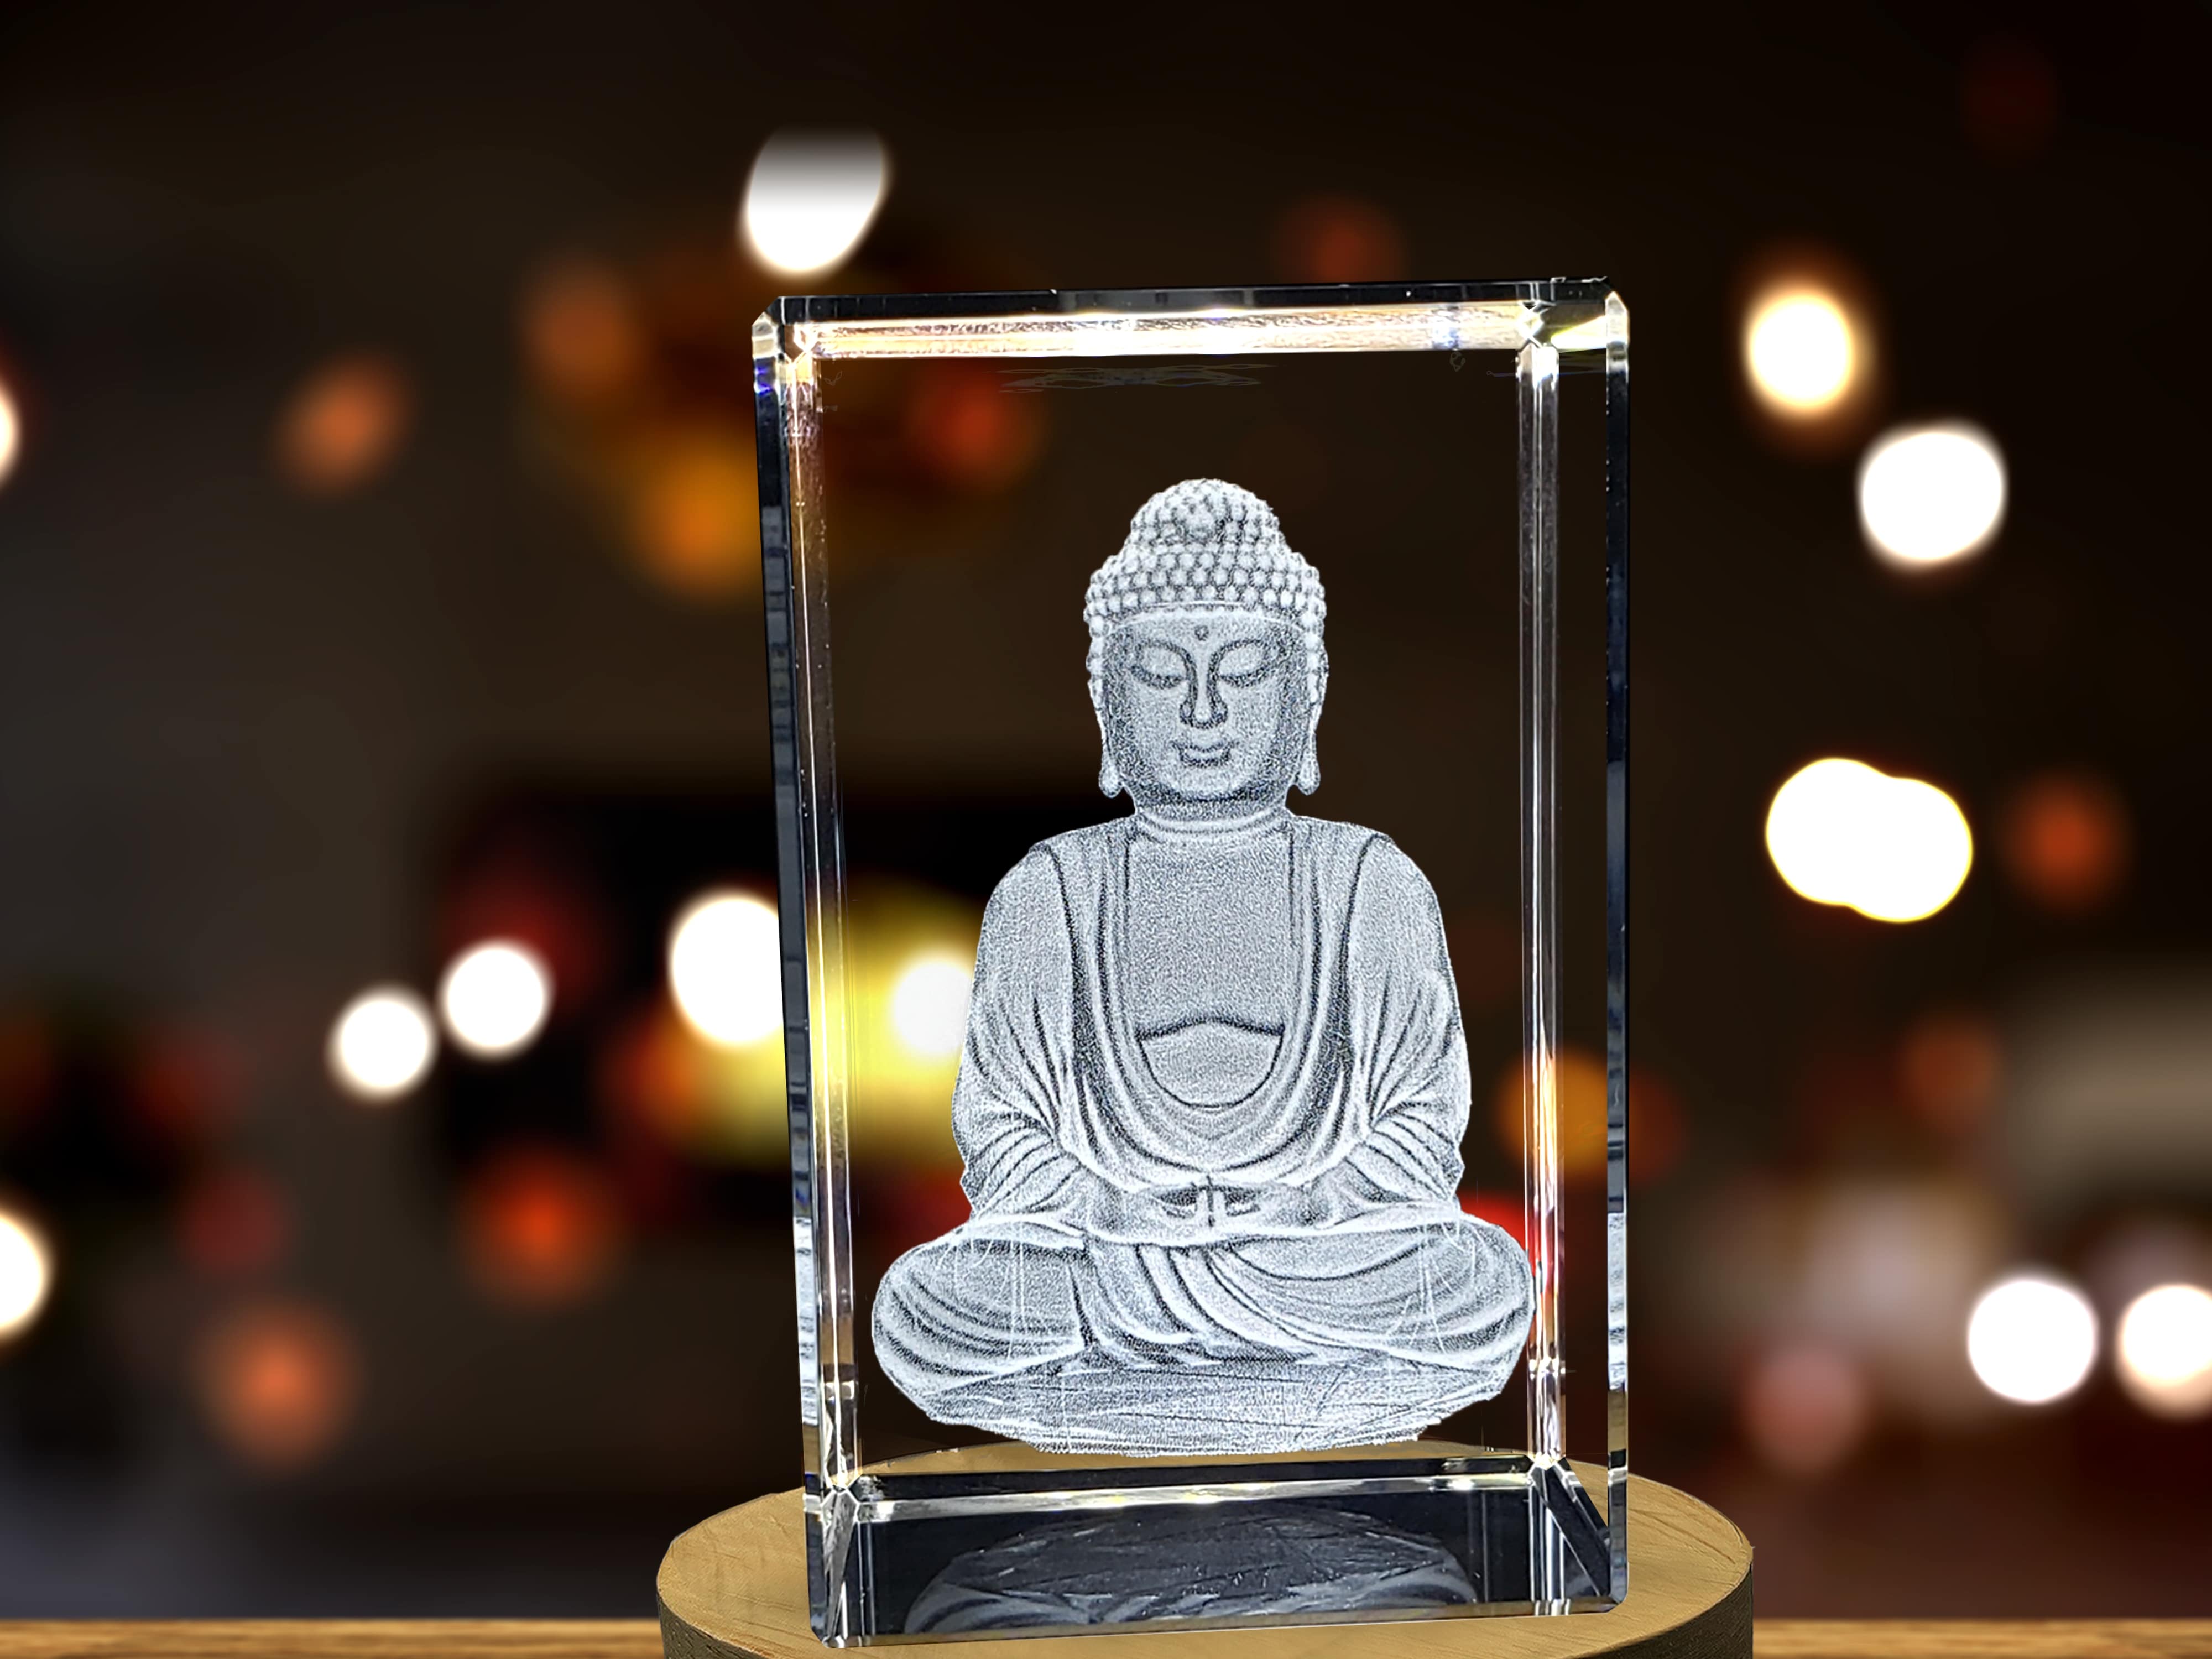 3D Crystal Buddha Statue with LED Light - Tranquil Illuminated Decor A&B Crystal Collection